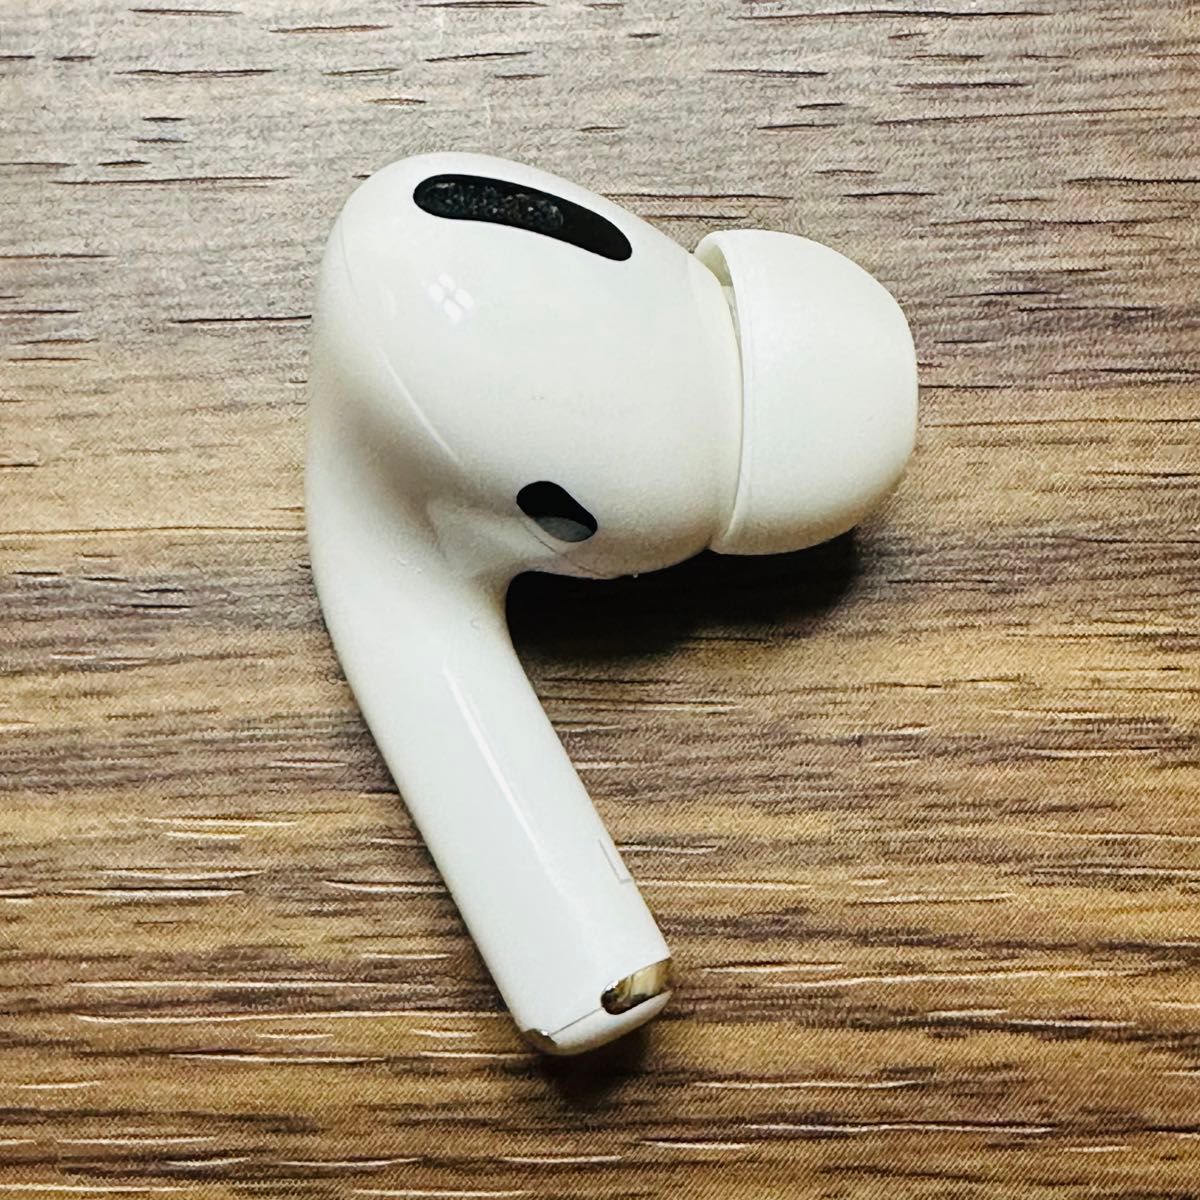 Apple Airpods Pro 左耳 L airpodspro｜Yahoo!フリマ（旧PayPay